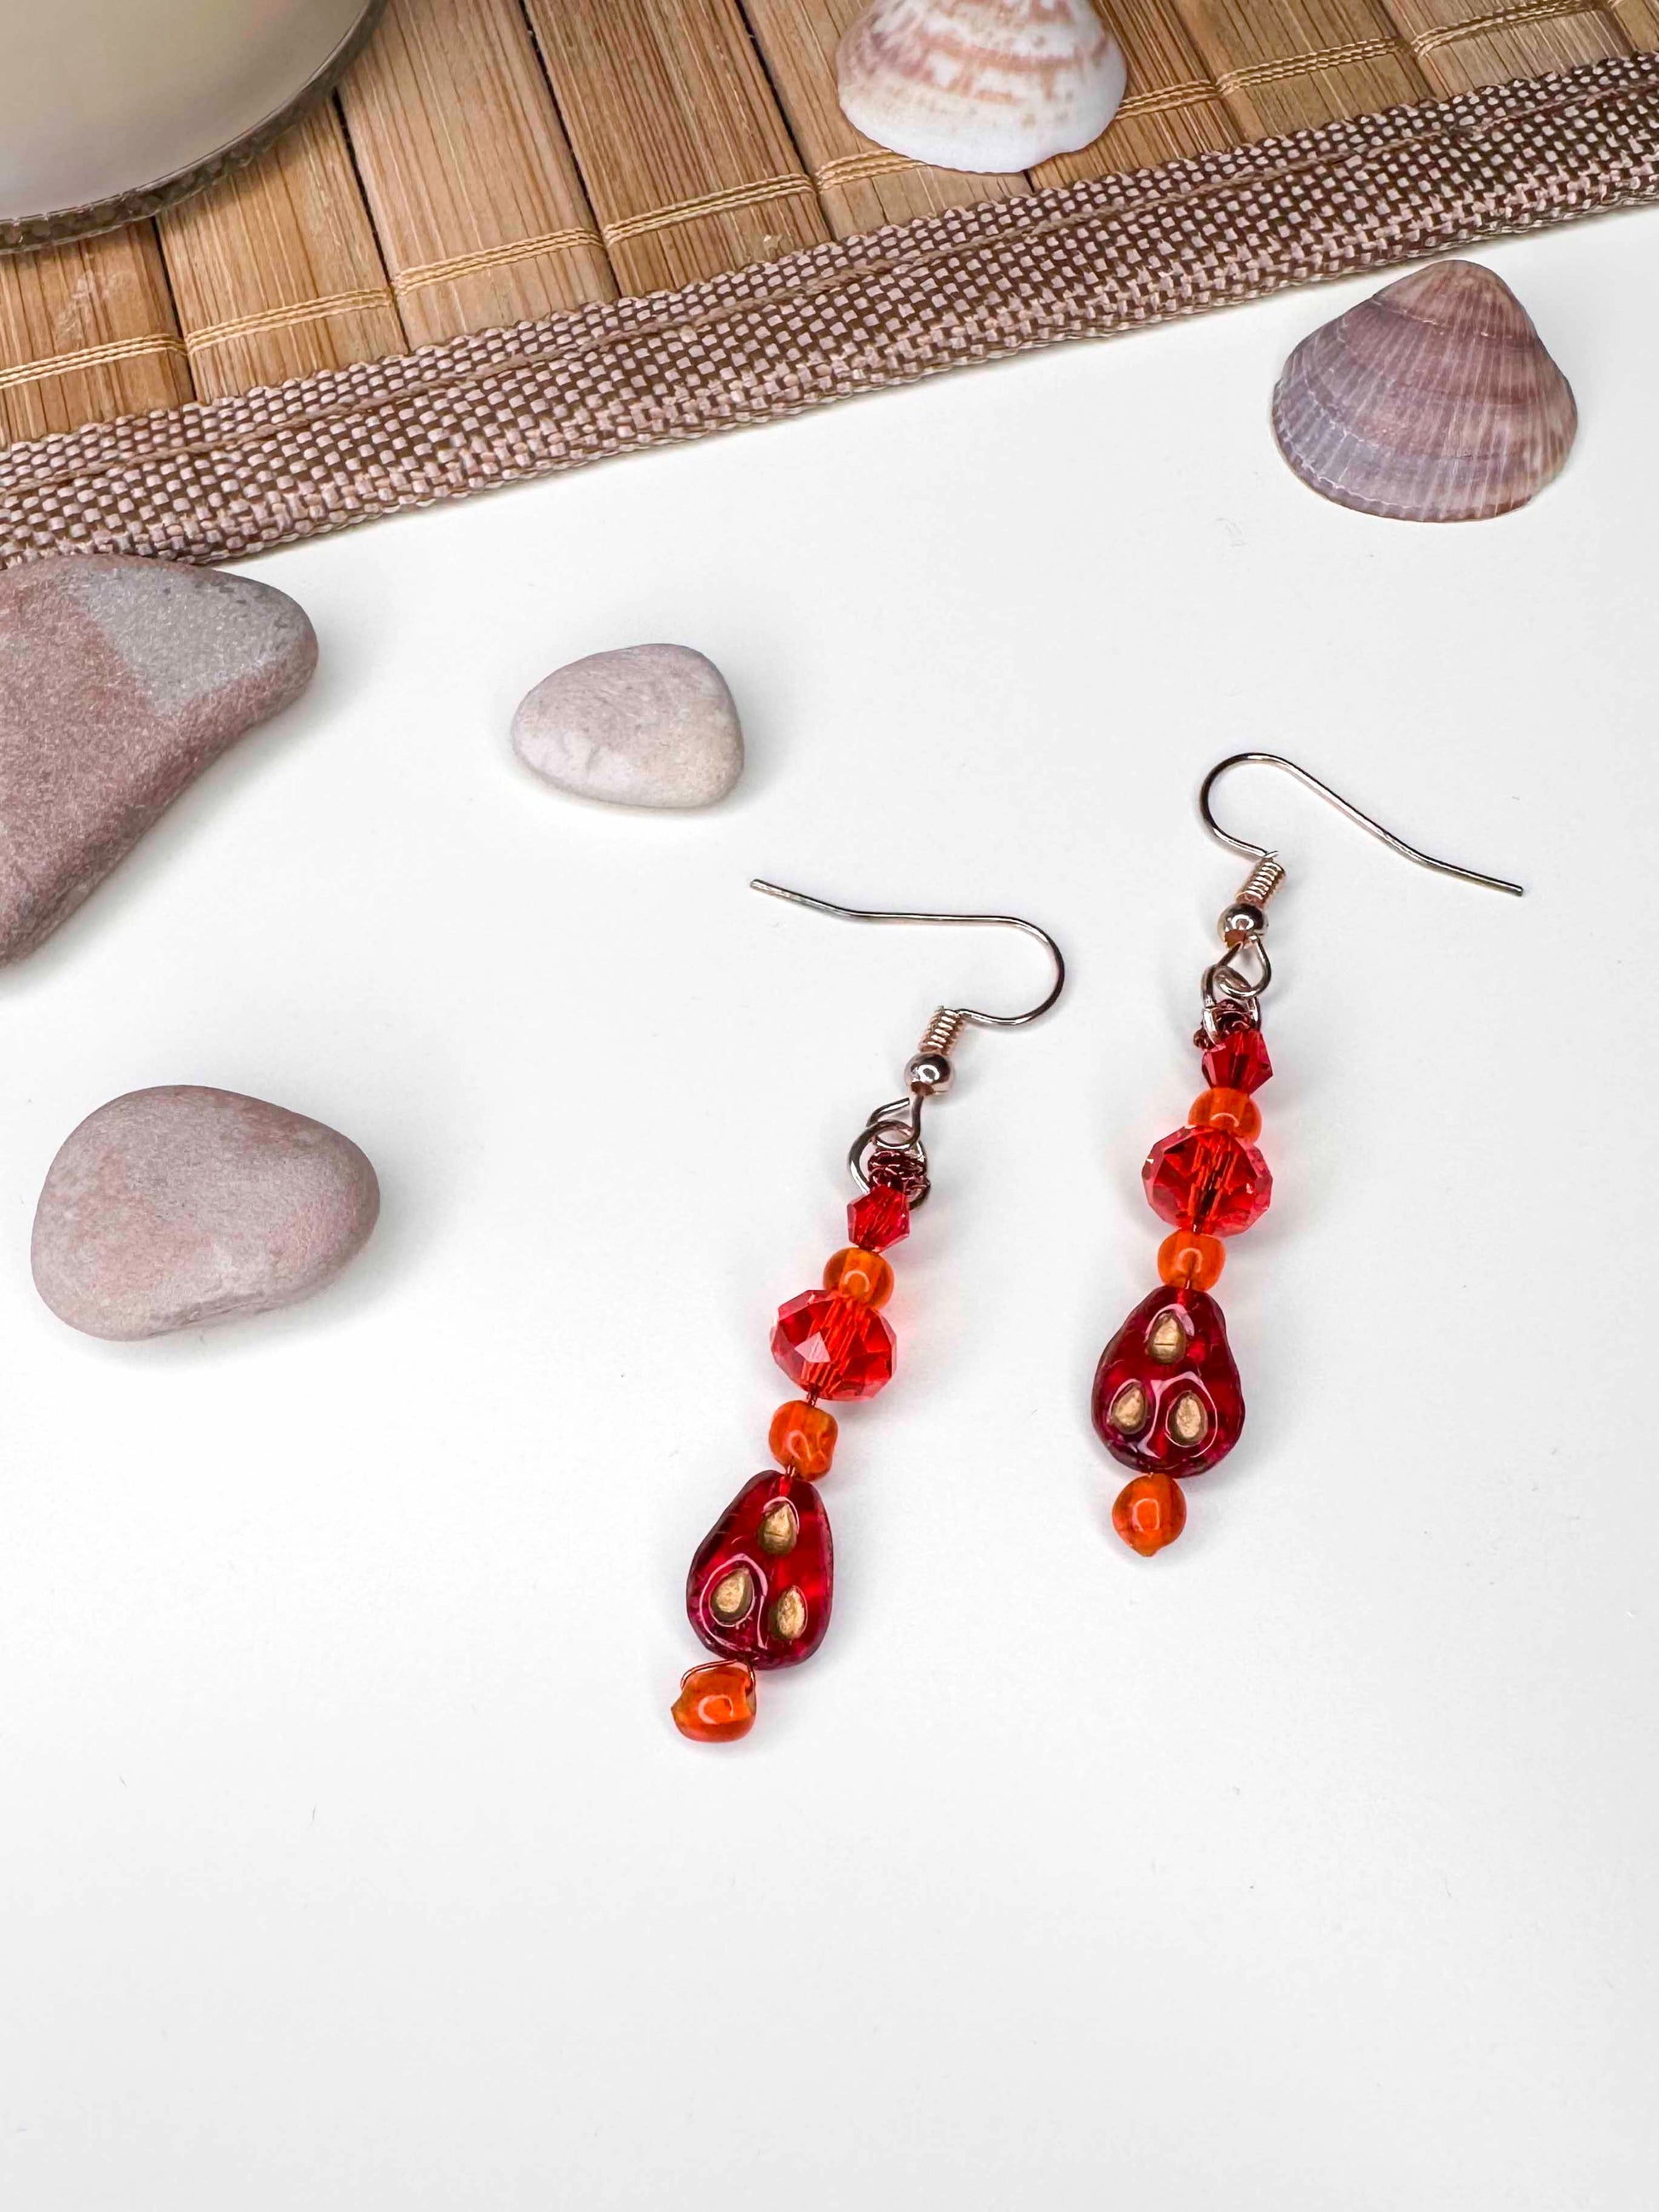 A handmade red and orange crystal beaded pair of dangle drop earrings with red glass charms.